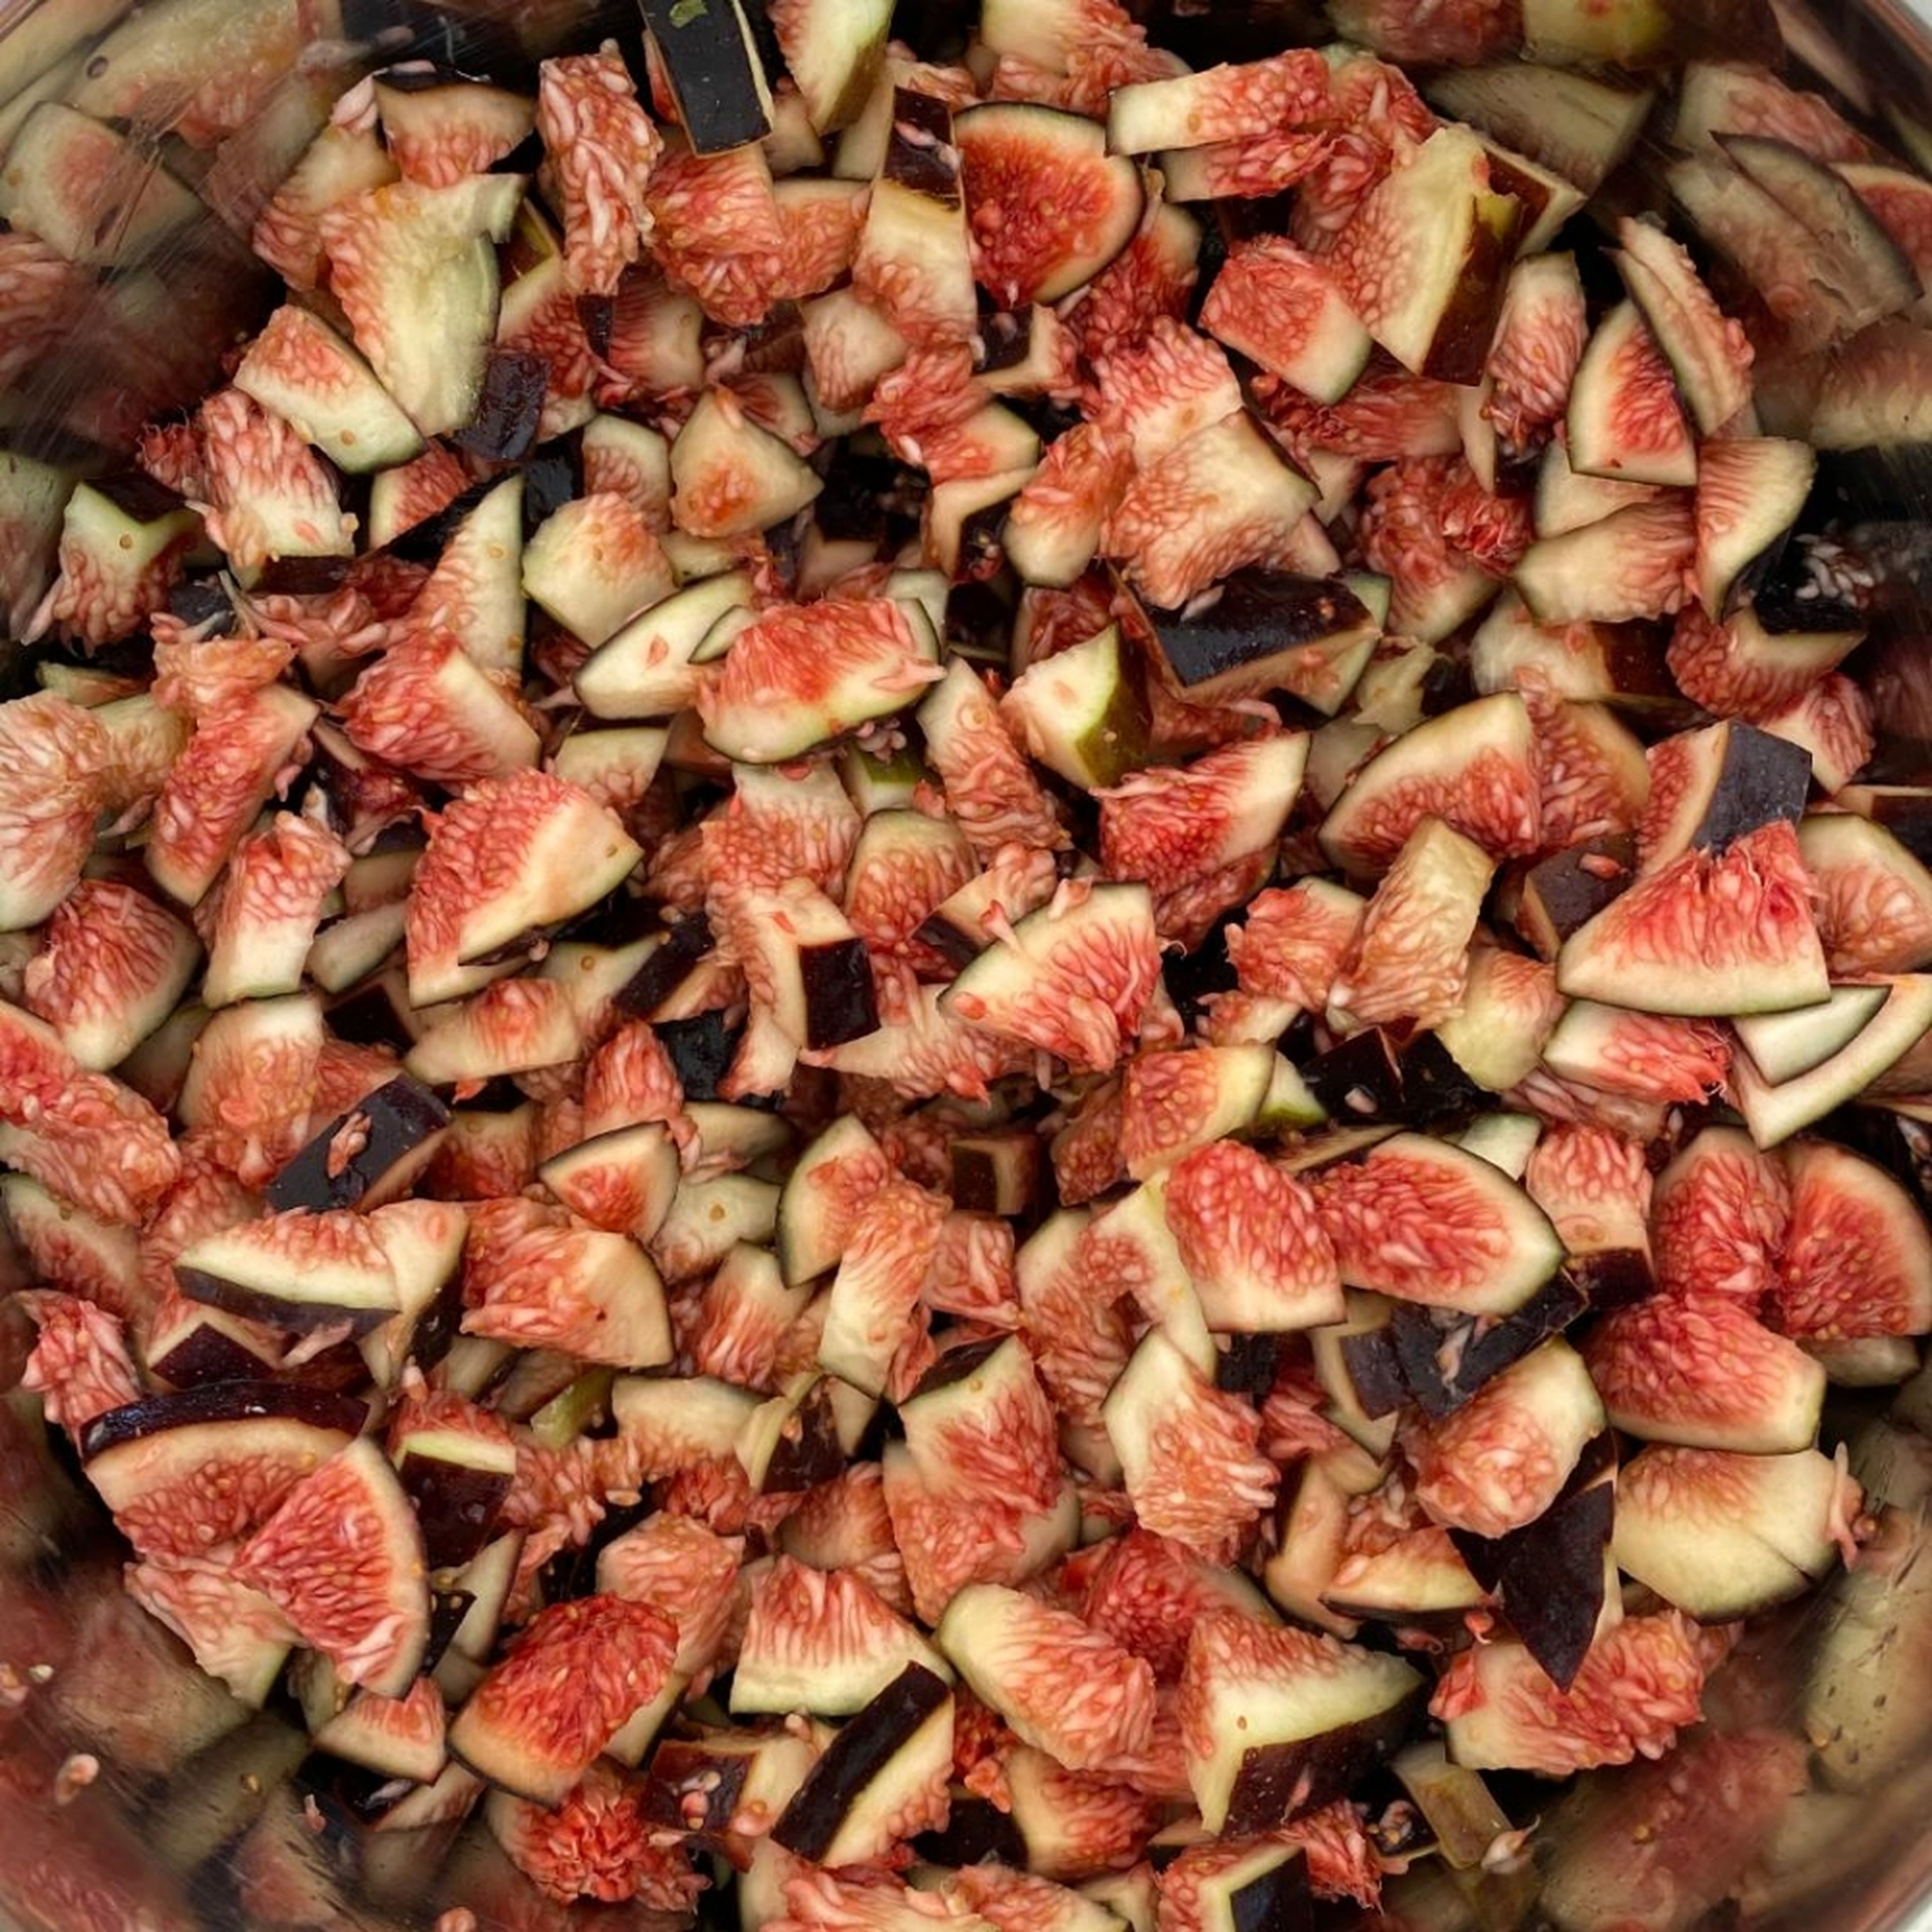 Rinse the figs, remove the stalks, cut them into small pieces and add them to a pot.